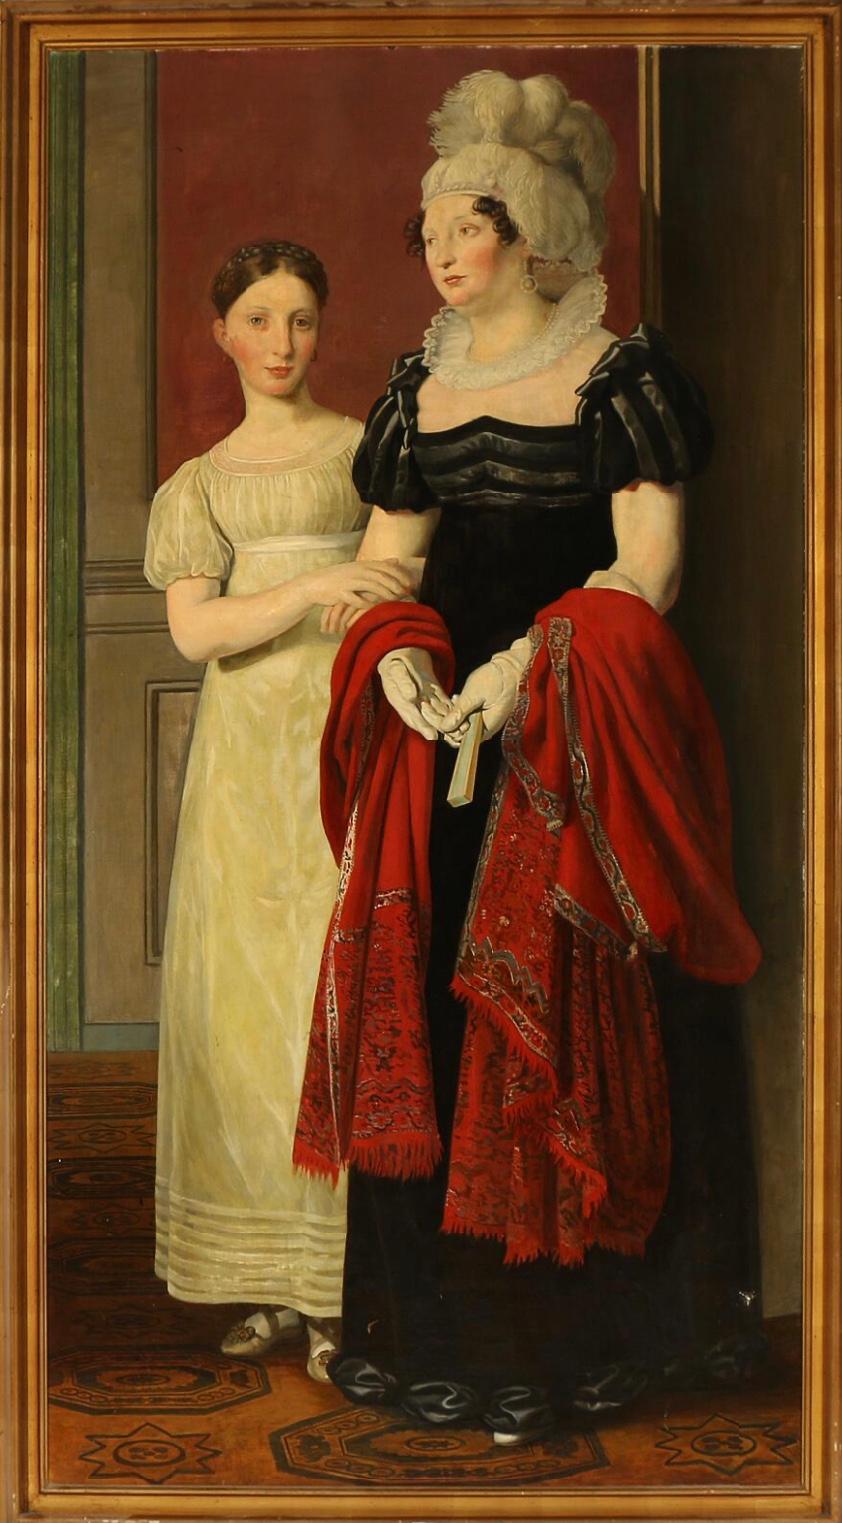 Mother and Daughter from Nathanson Family by C. W. Eckersberg, museum copy 19th. - Painting by C. W. Eckersberg 